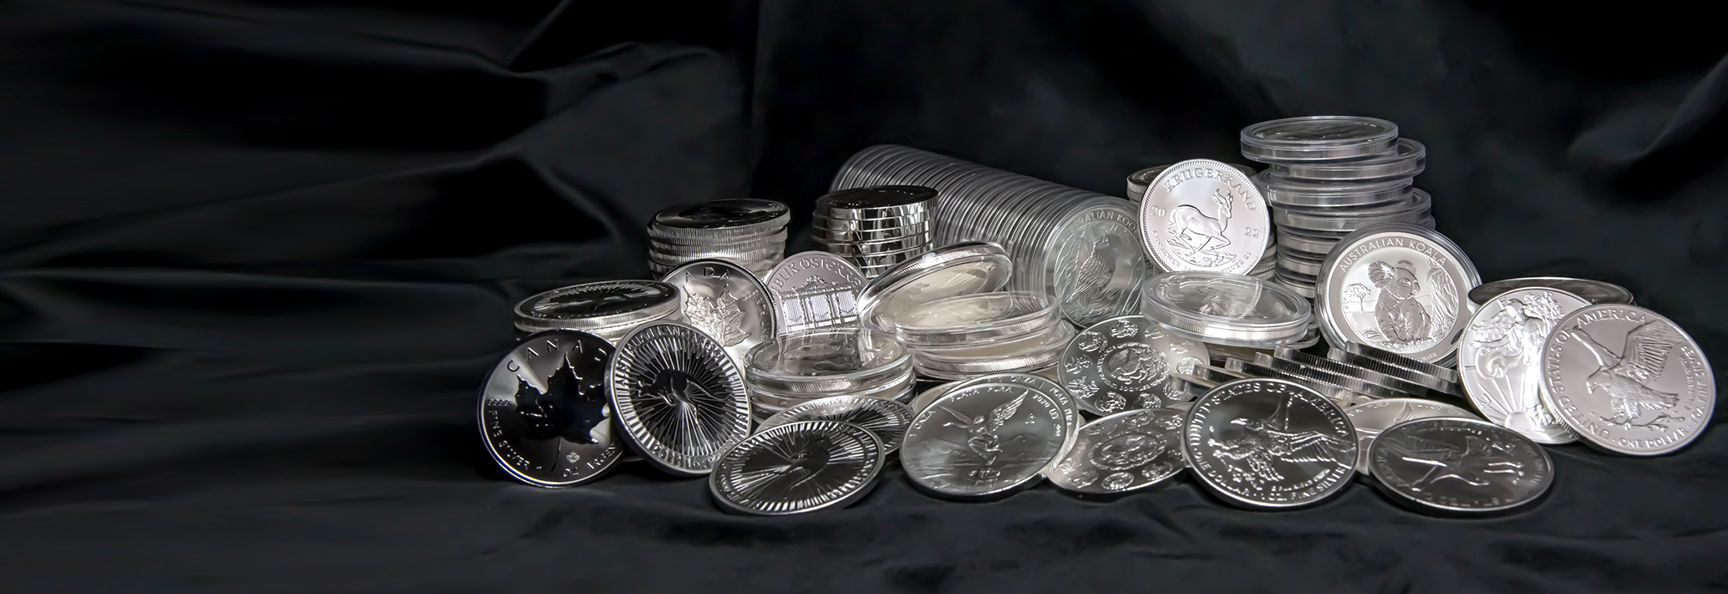 We pay up to 4% above the spot price of silver for your 1 oz silver coins*!